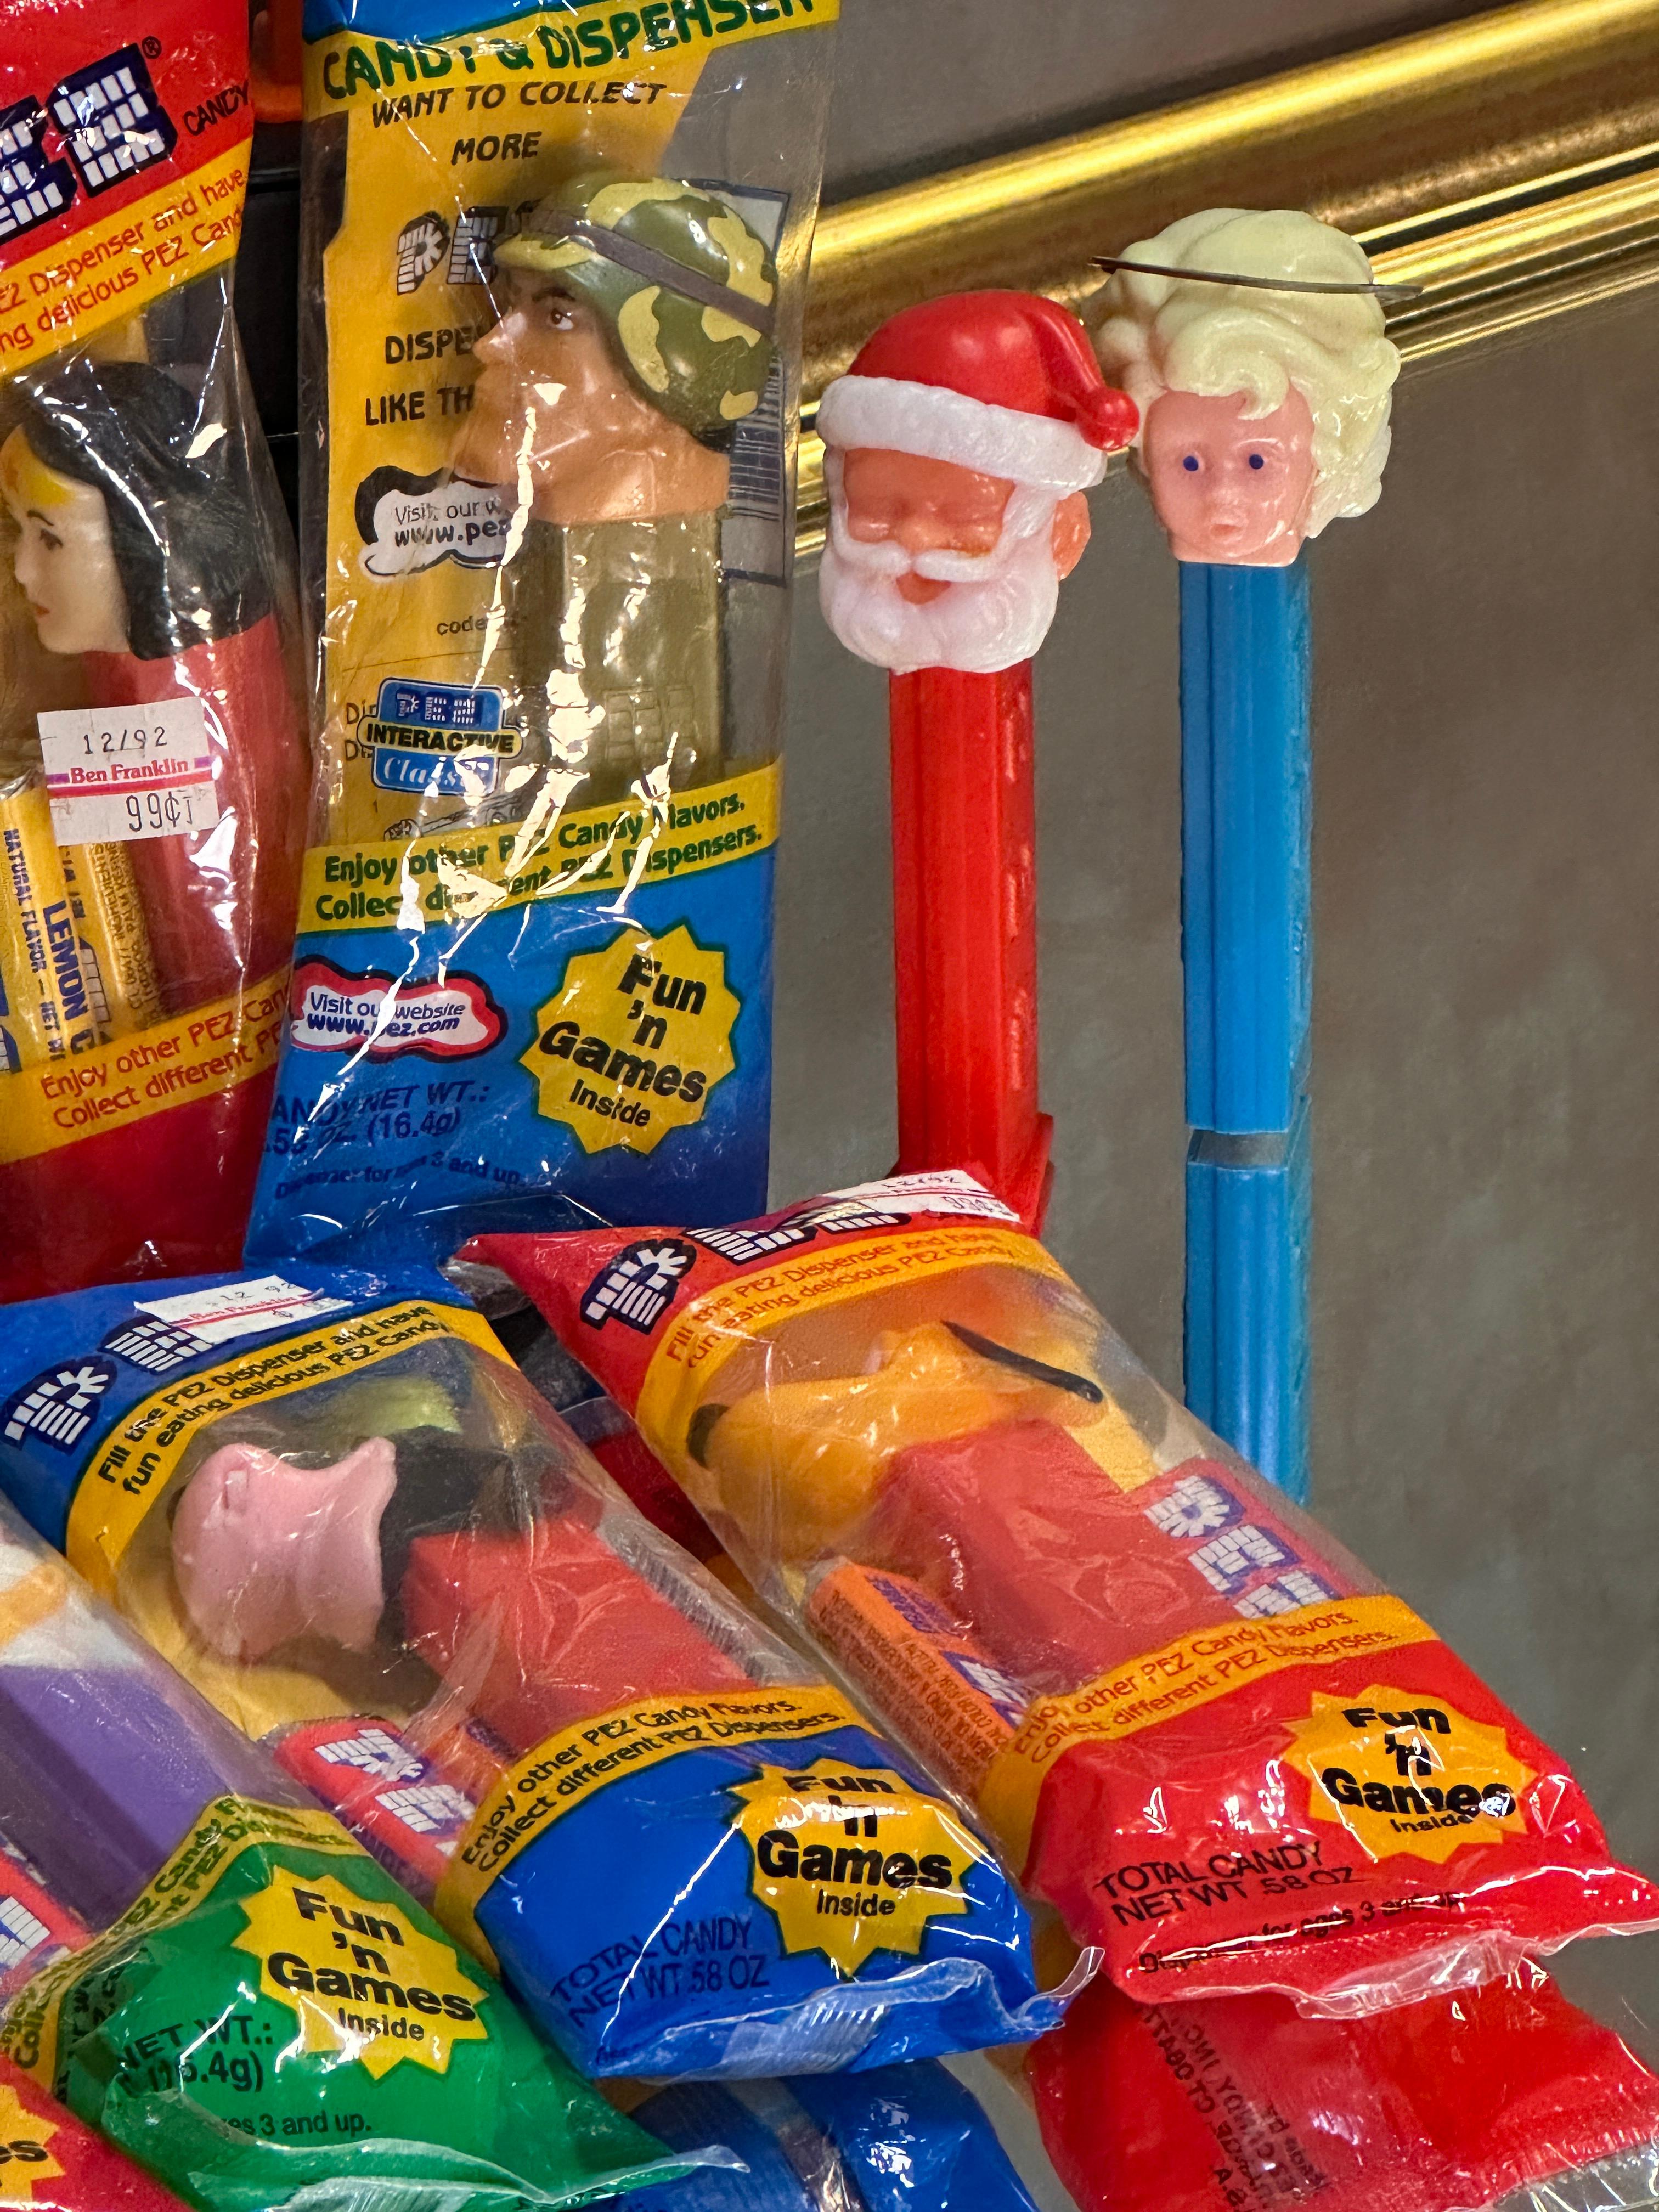 Large Collection of Assorted PEZ Dispensers